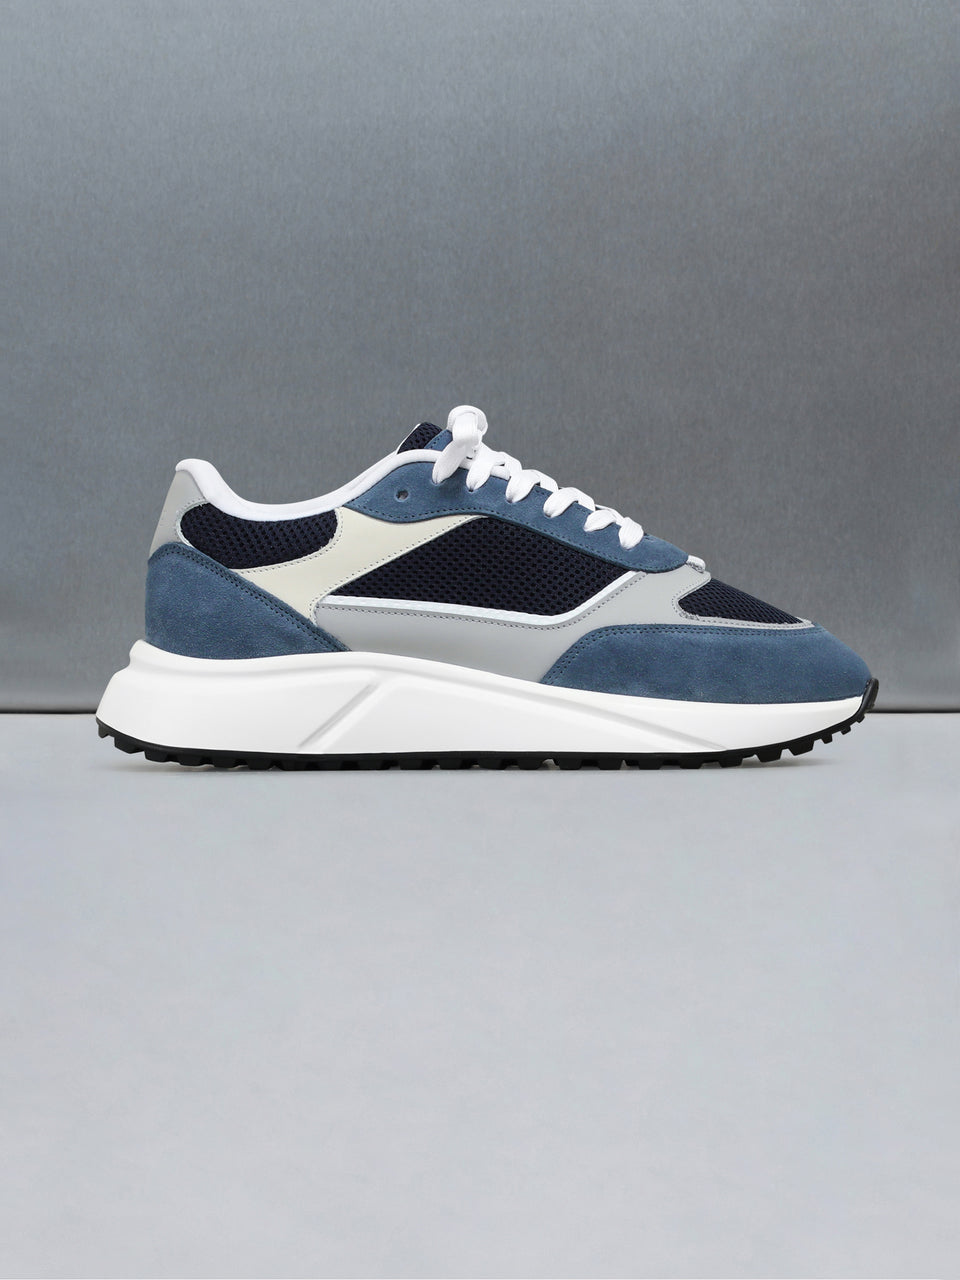 Technical Runner in Pacific Blue